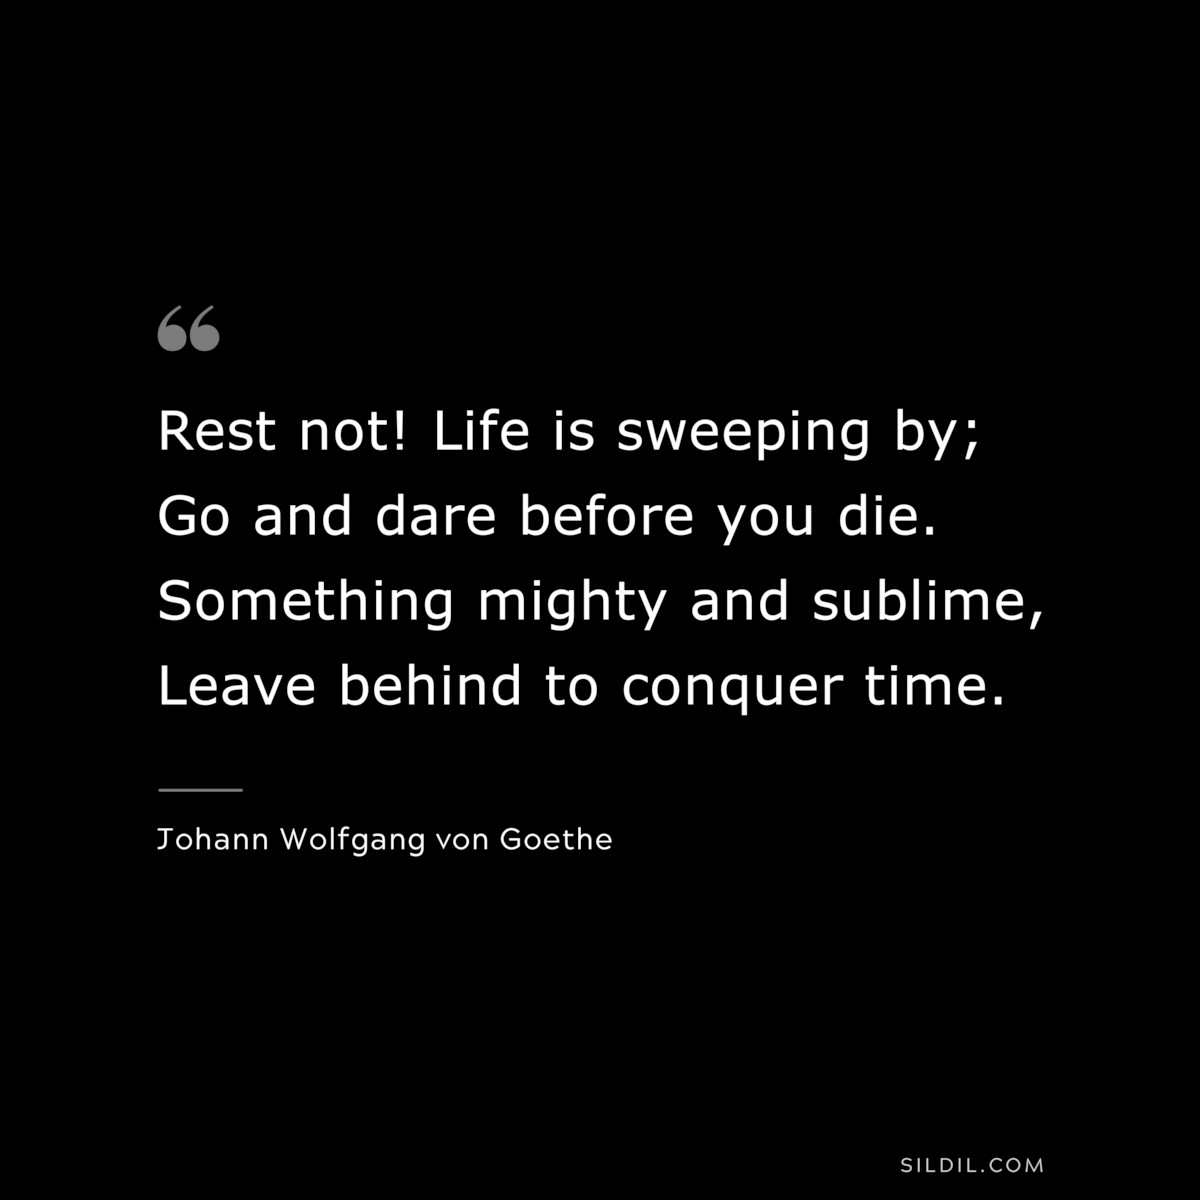 Rest not! Life is sweeping by; Go and dare before you die. Something mighty and sublime, Leave behind to conquer time.― Johann Wolfgang von Goethe